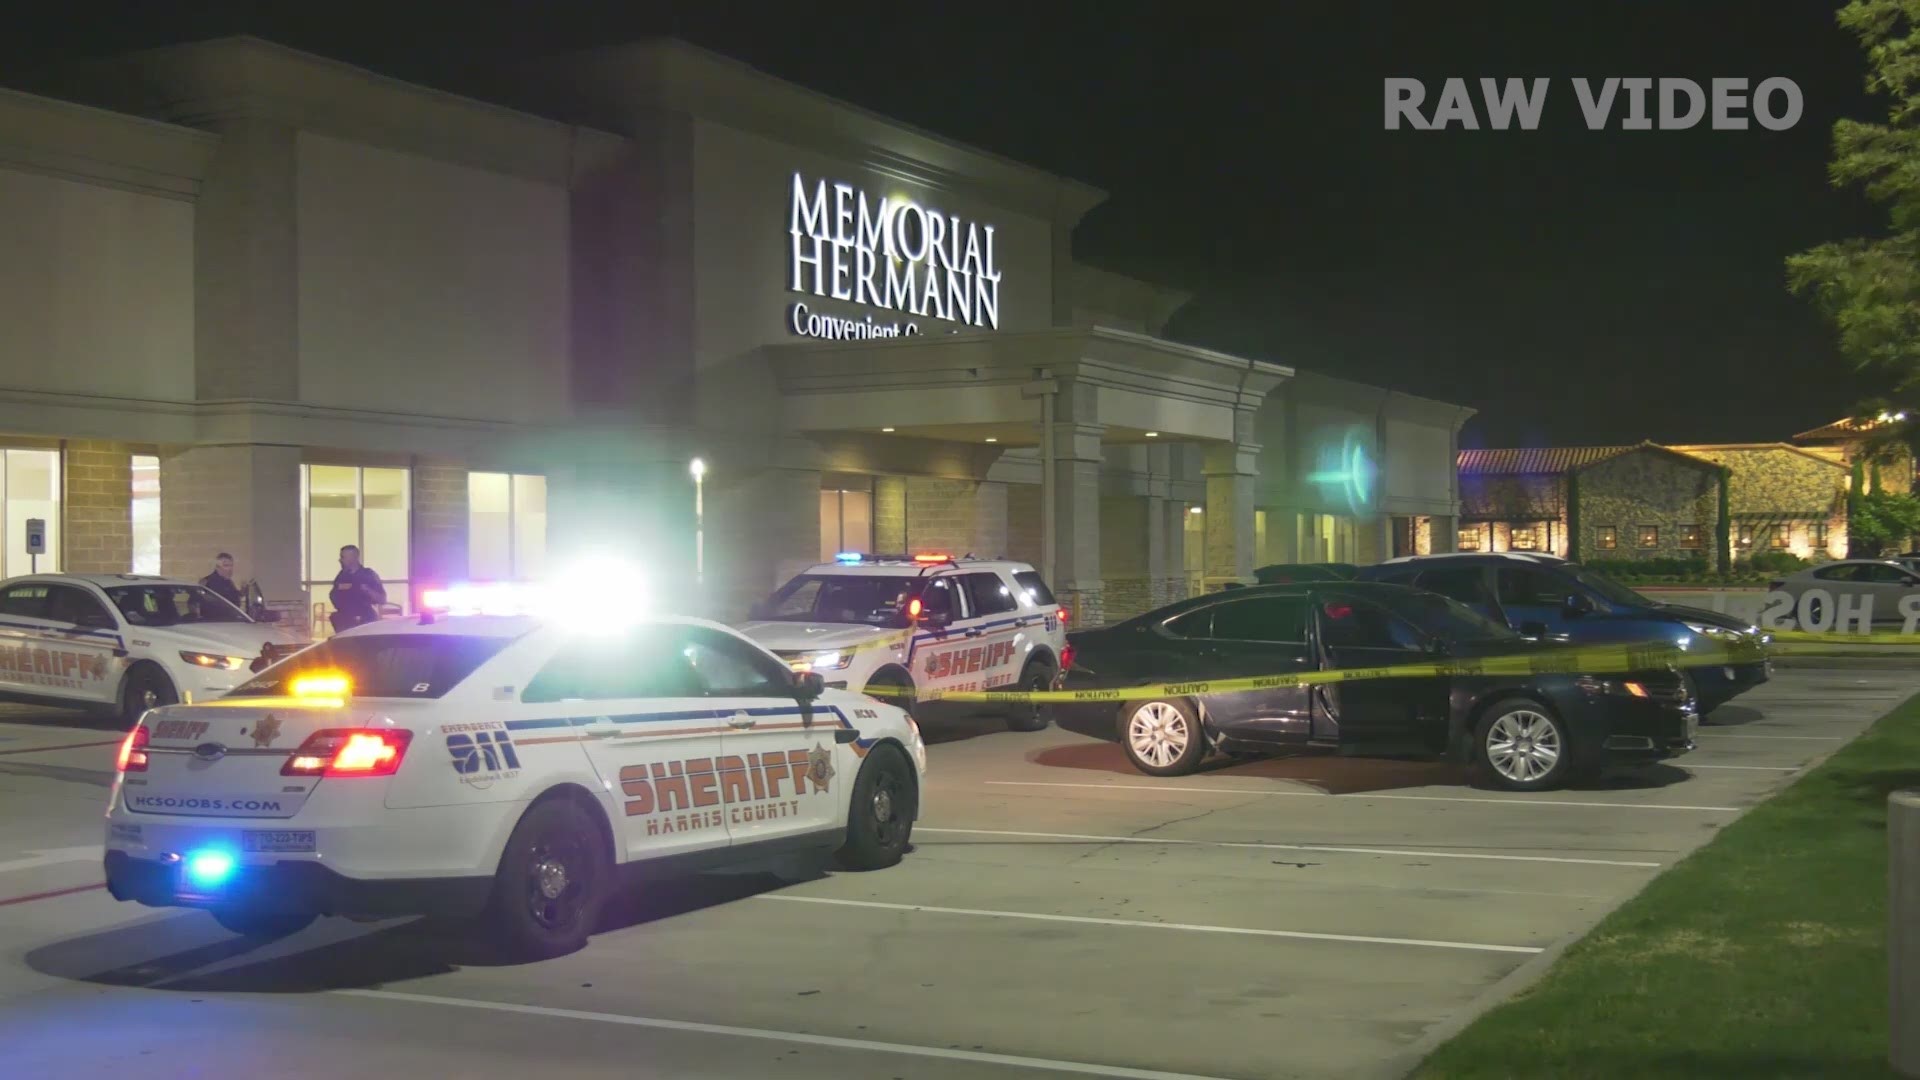 Sheriffs deputies were dispatched overnight to the Memorial Hermann Care Center in the 14200 block of E. Sam Houston Parkway North in response to a shooting call.